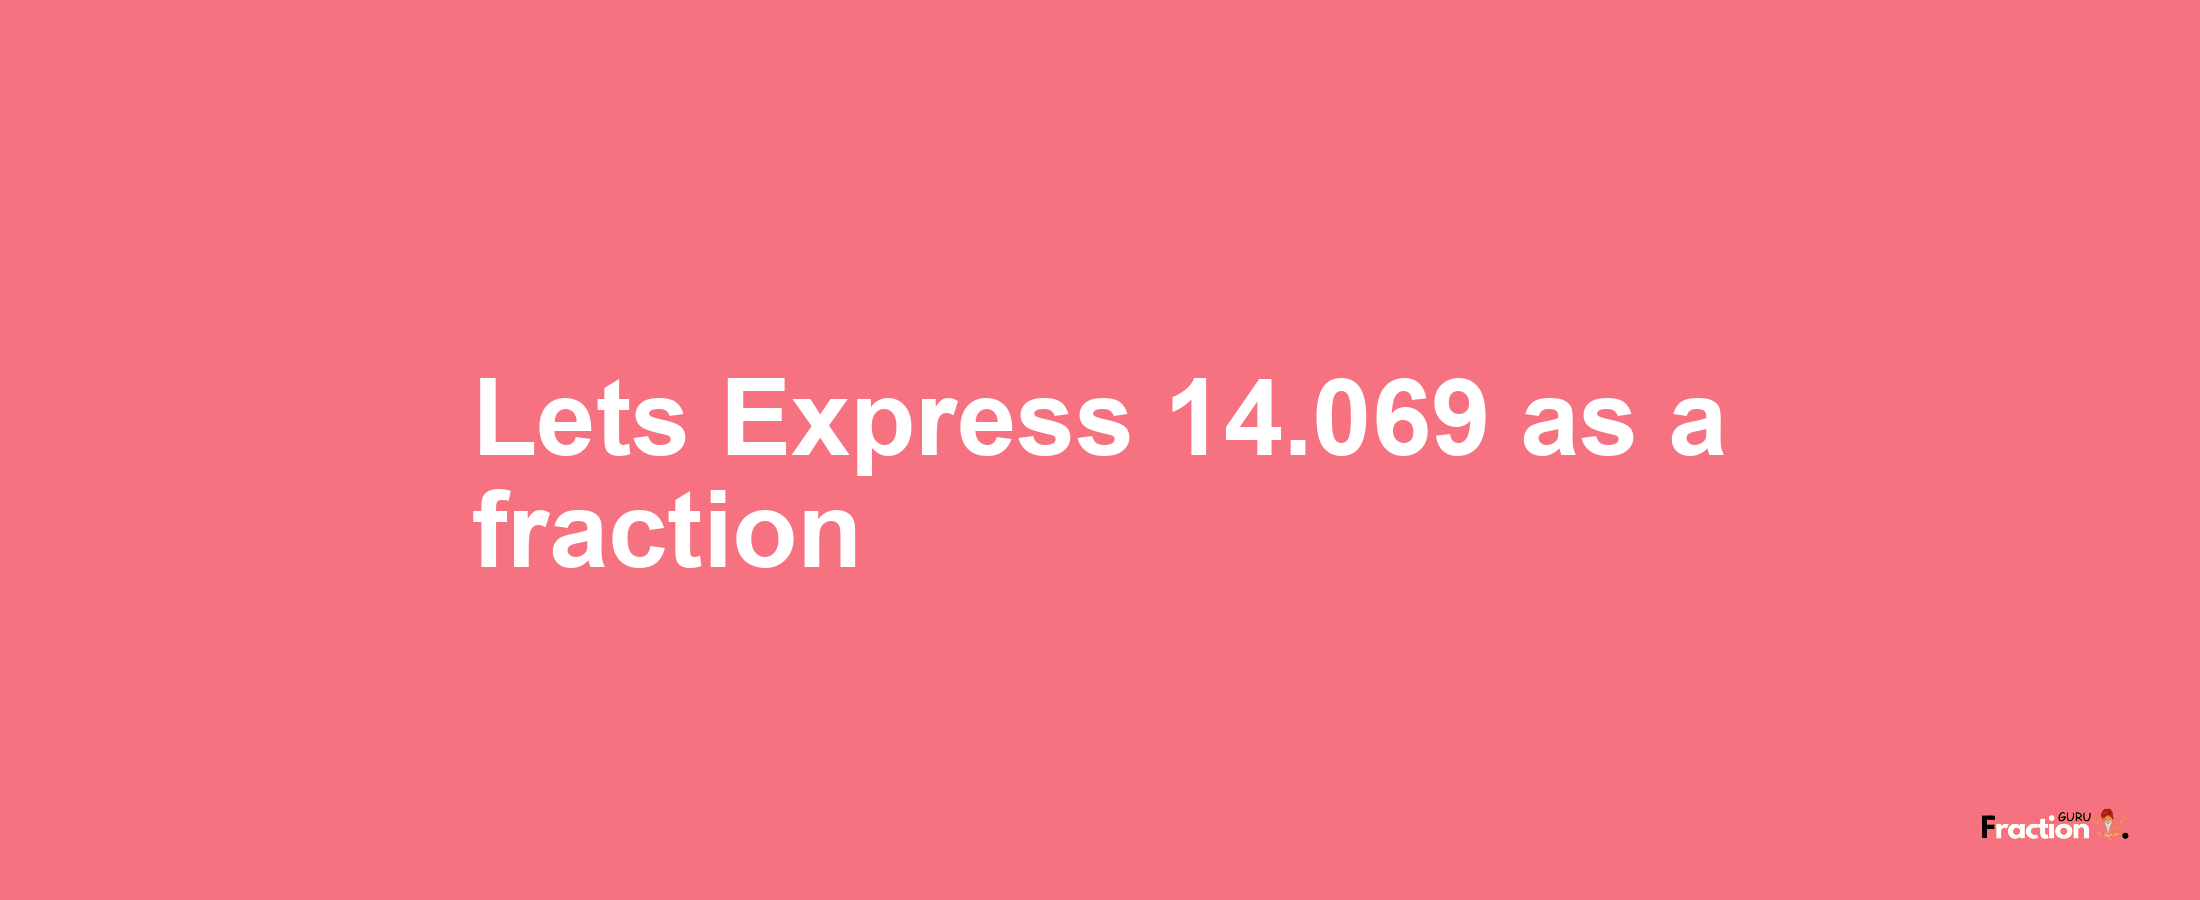 Lets Express 14.069 as afraction